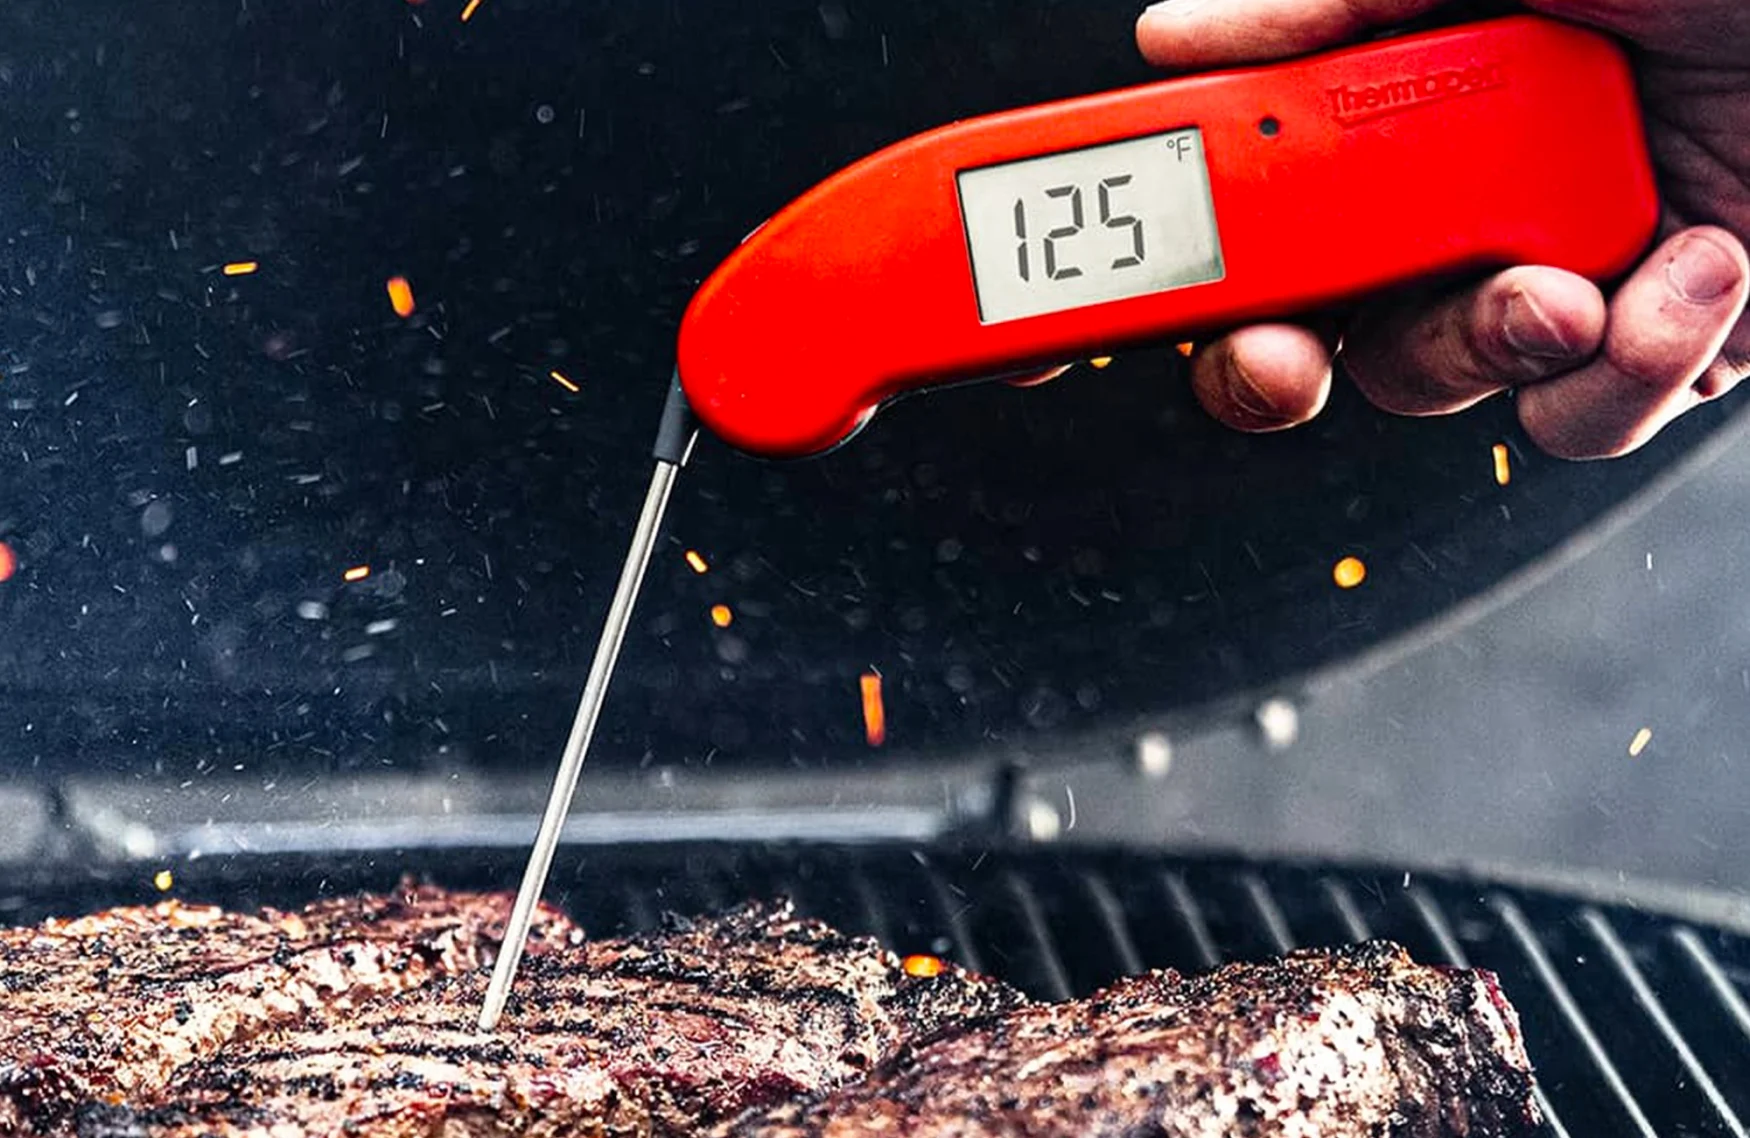 The ThermoWorks Thermapen One thermometer taking the temperature of a piece of meat on a grill.